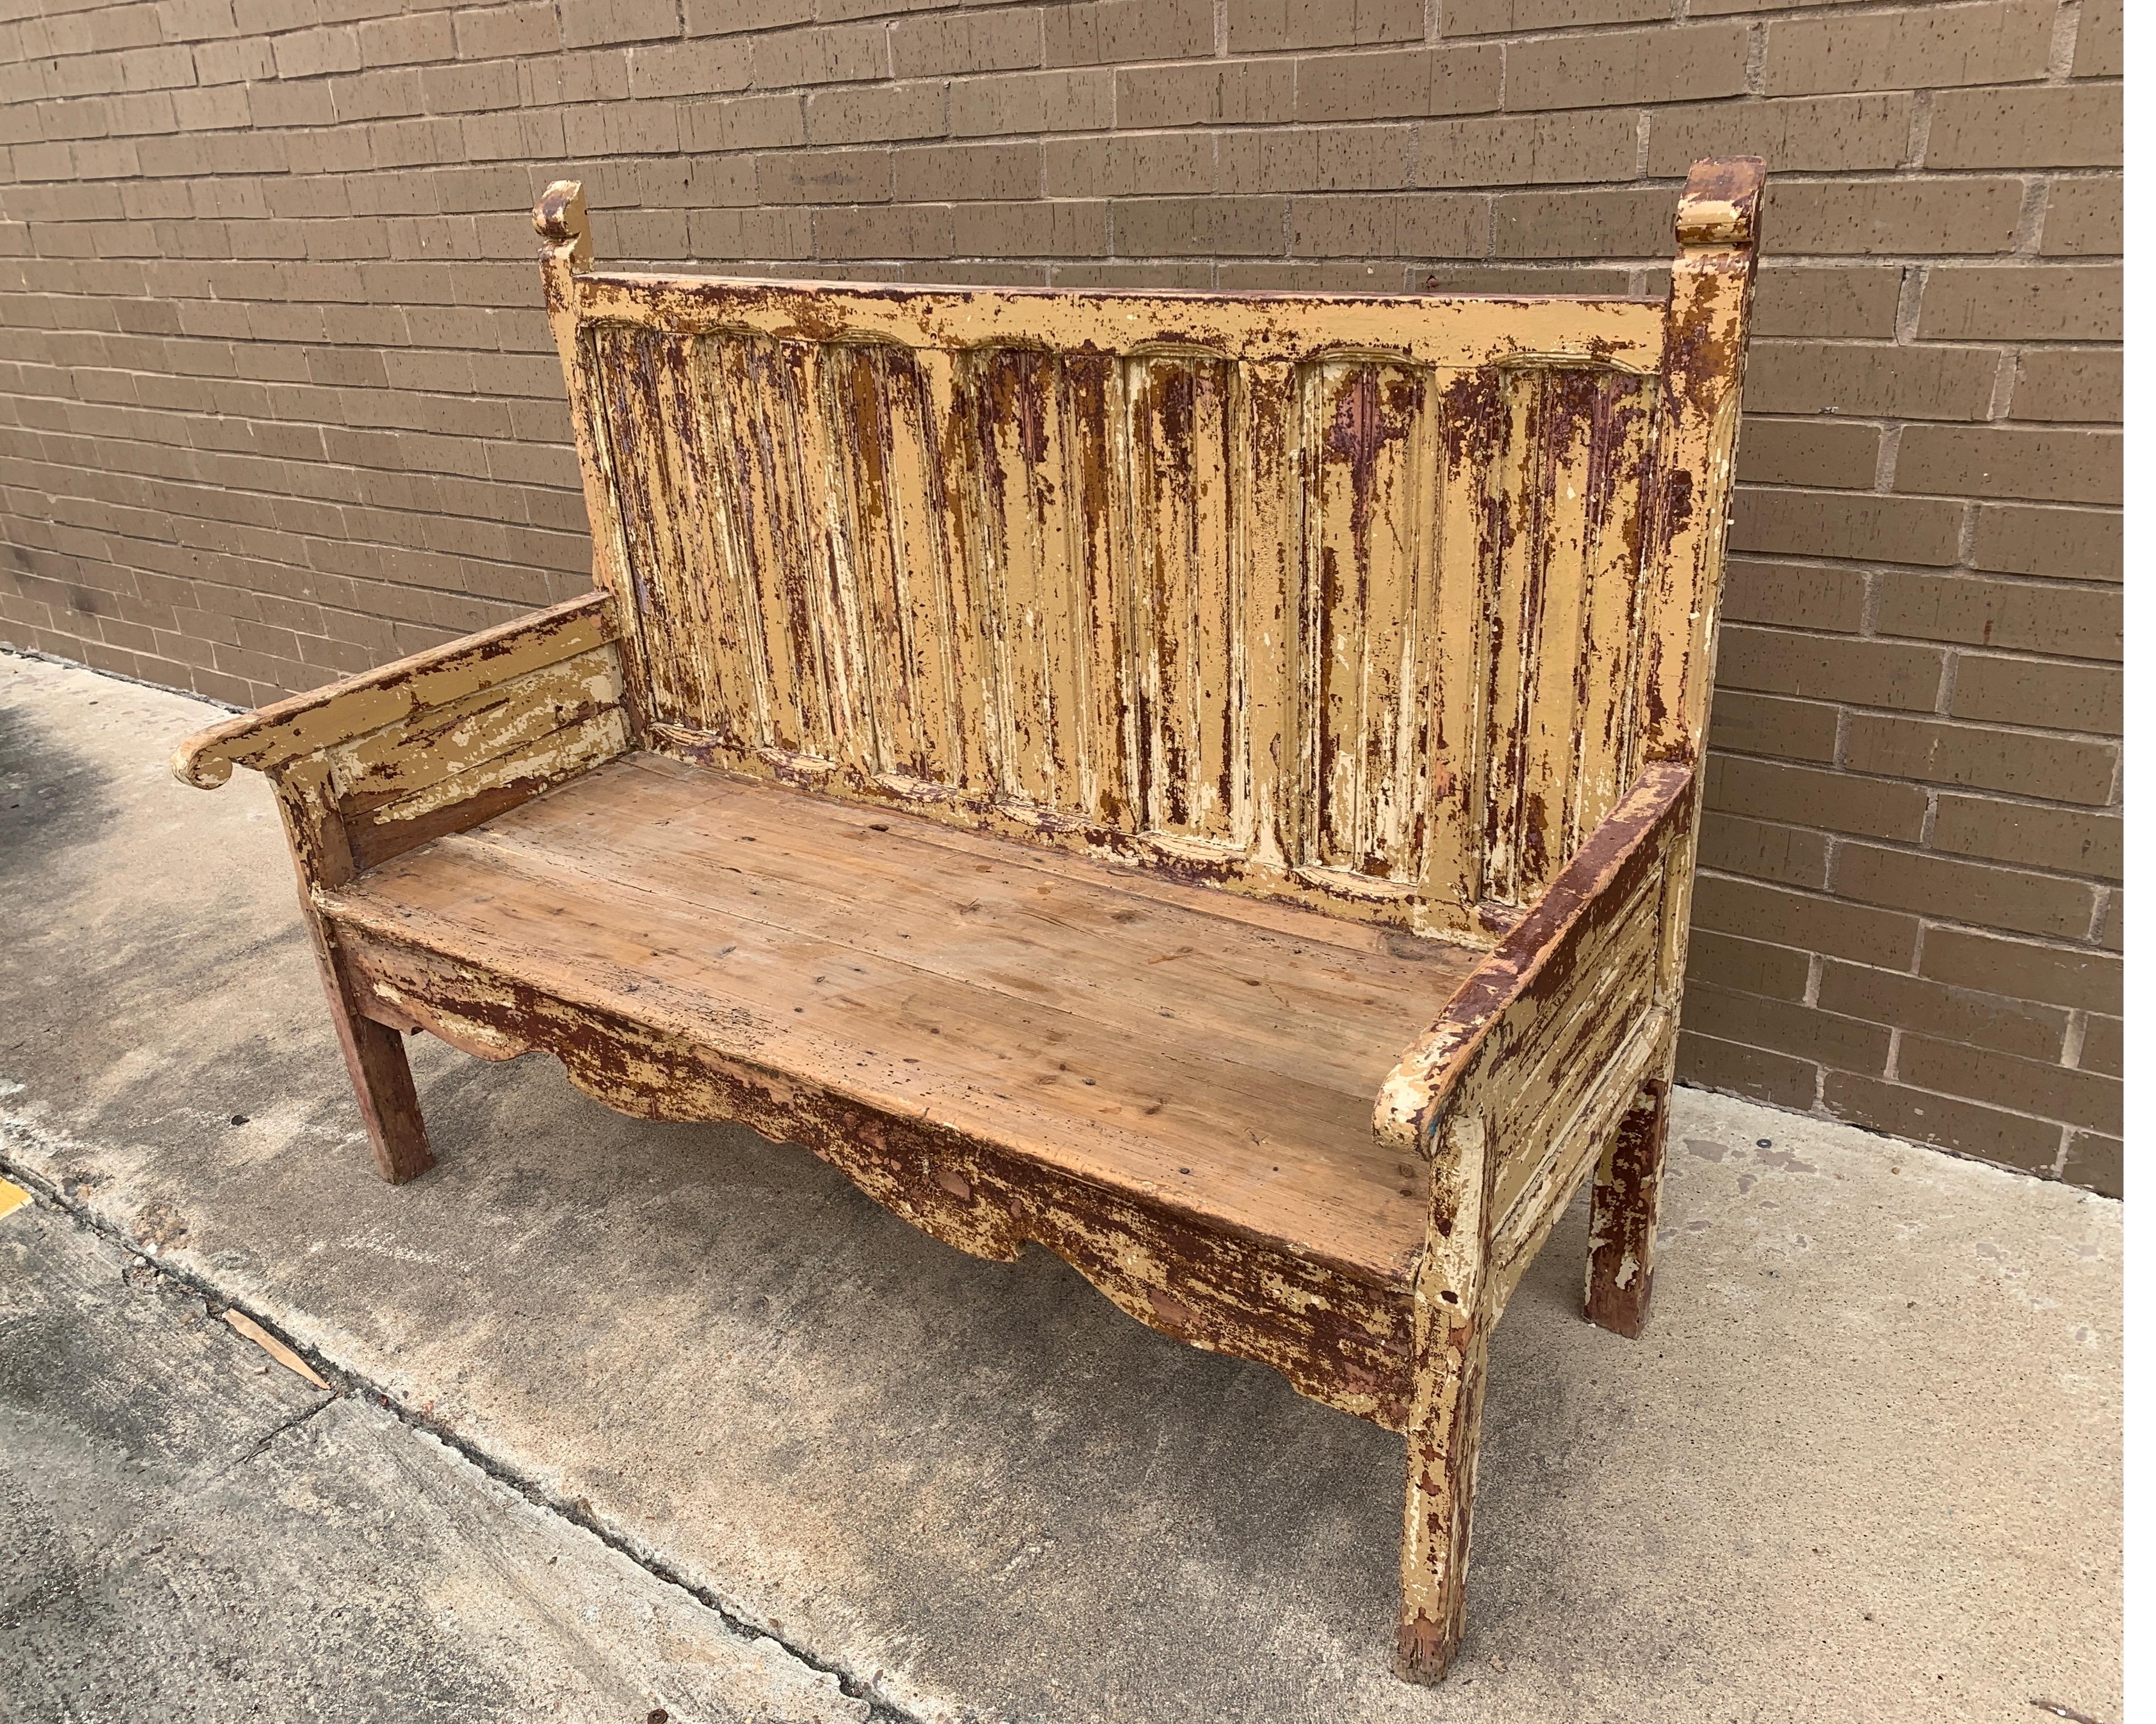 This Spanish bench has a high solid back and ton of character. It’s rustic and sturdy with layers of paint. It's great against a wall under a covered patio or inside the home in a hallway.